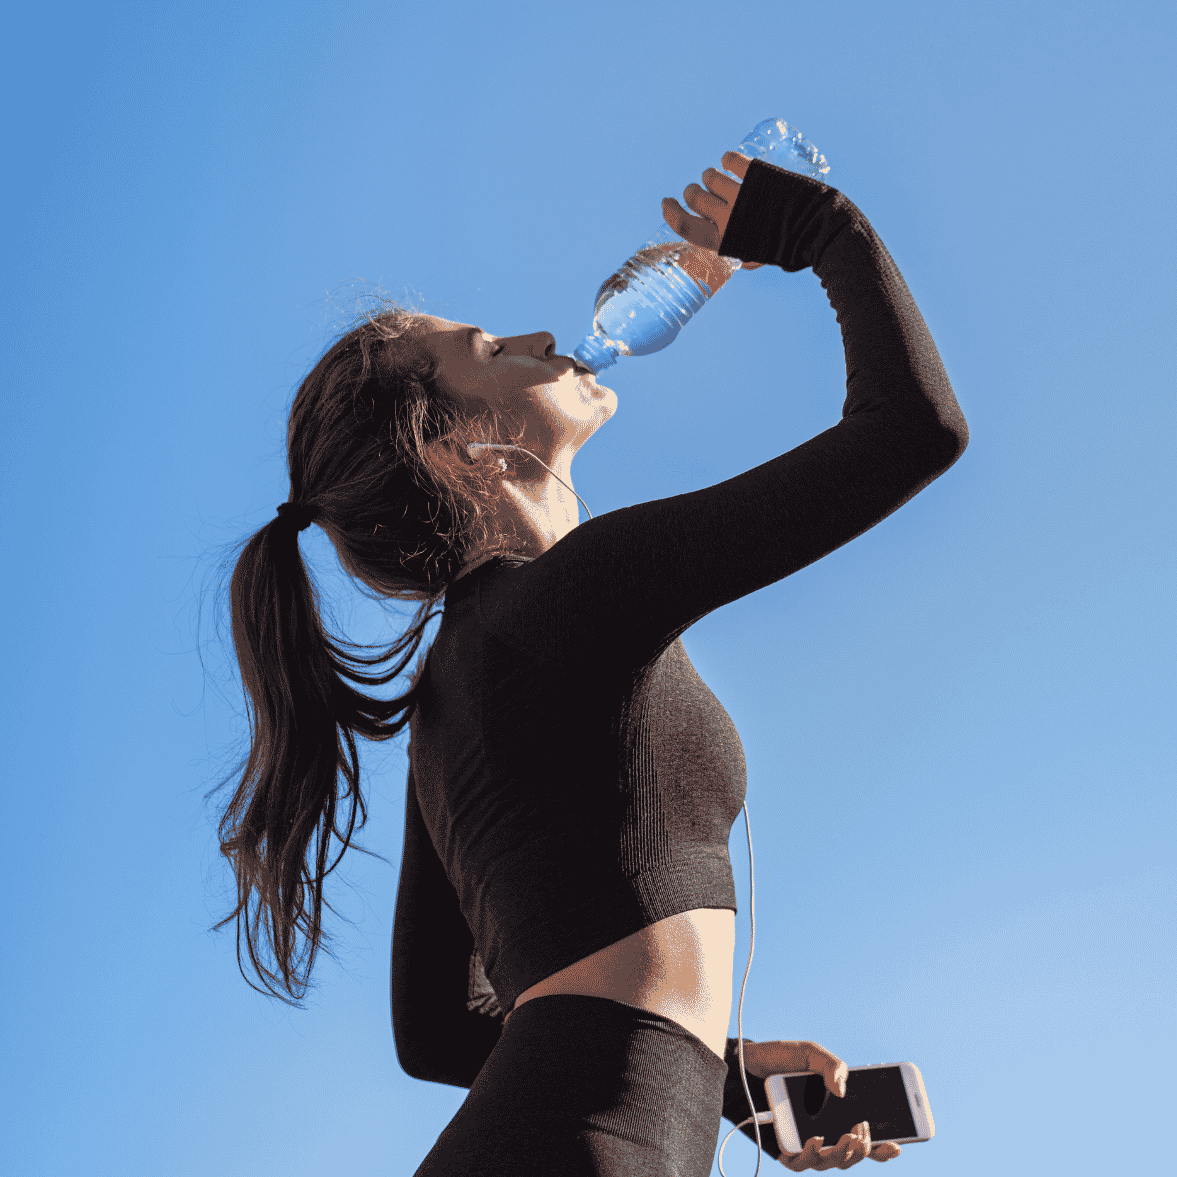 The Top Water Bottle for Every Workout